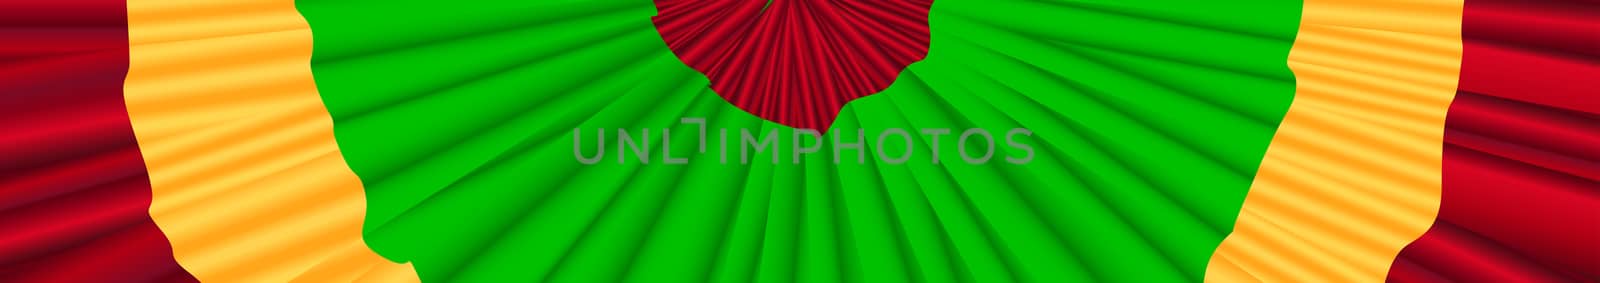 Red yellow and green Italian flag colour bunting banner over a white background